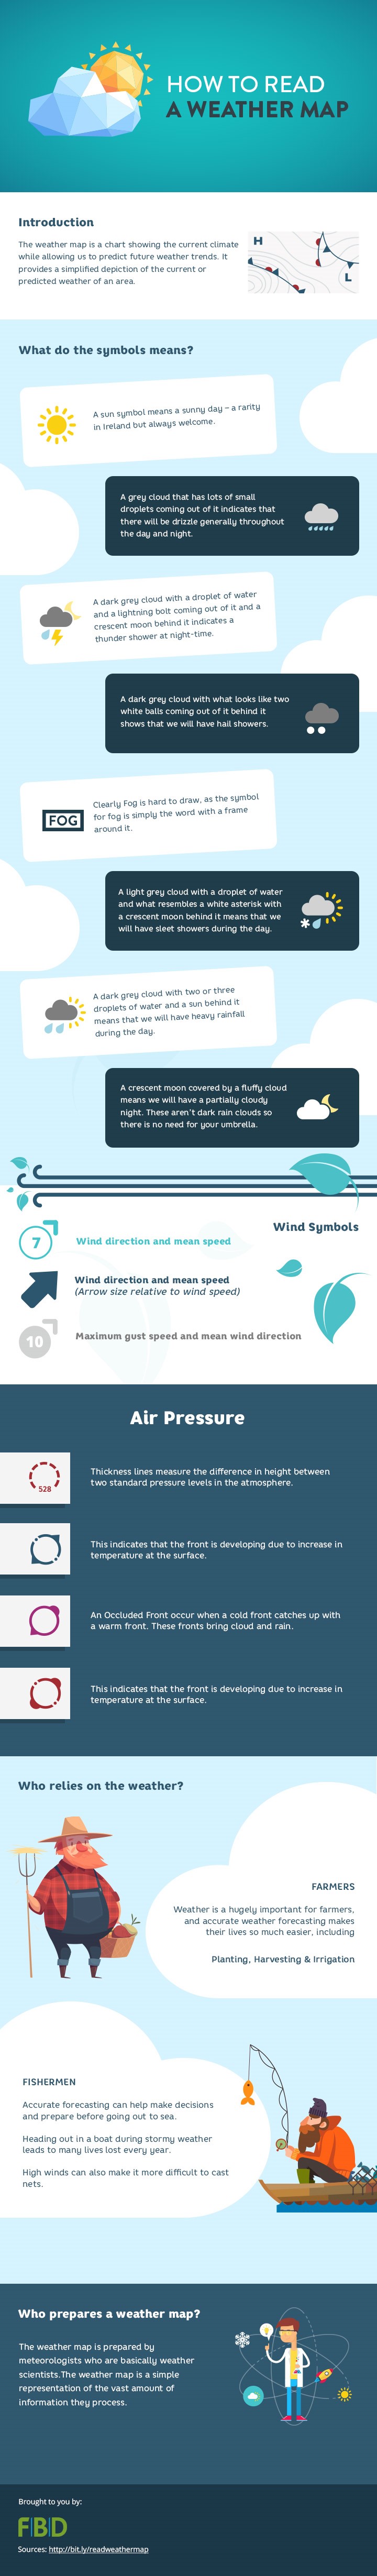 How To Read A Weather Map Infographic